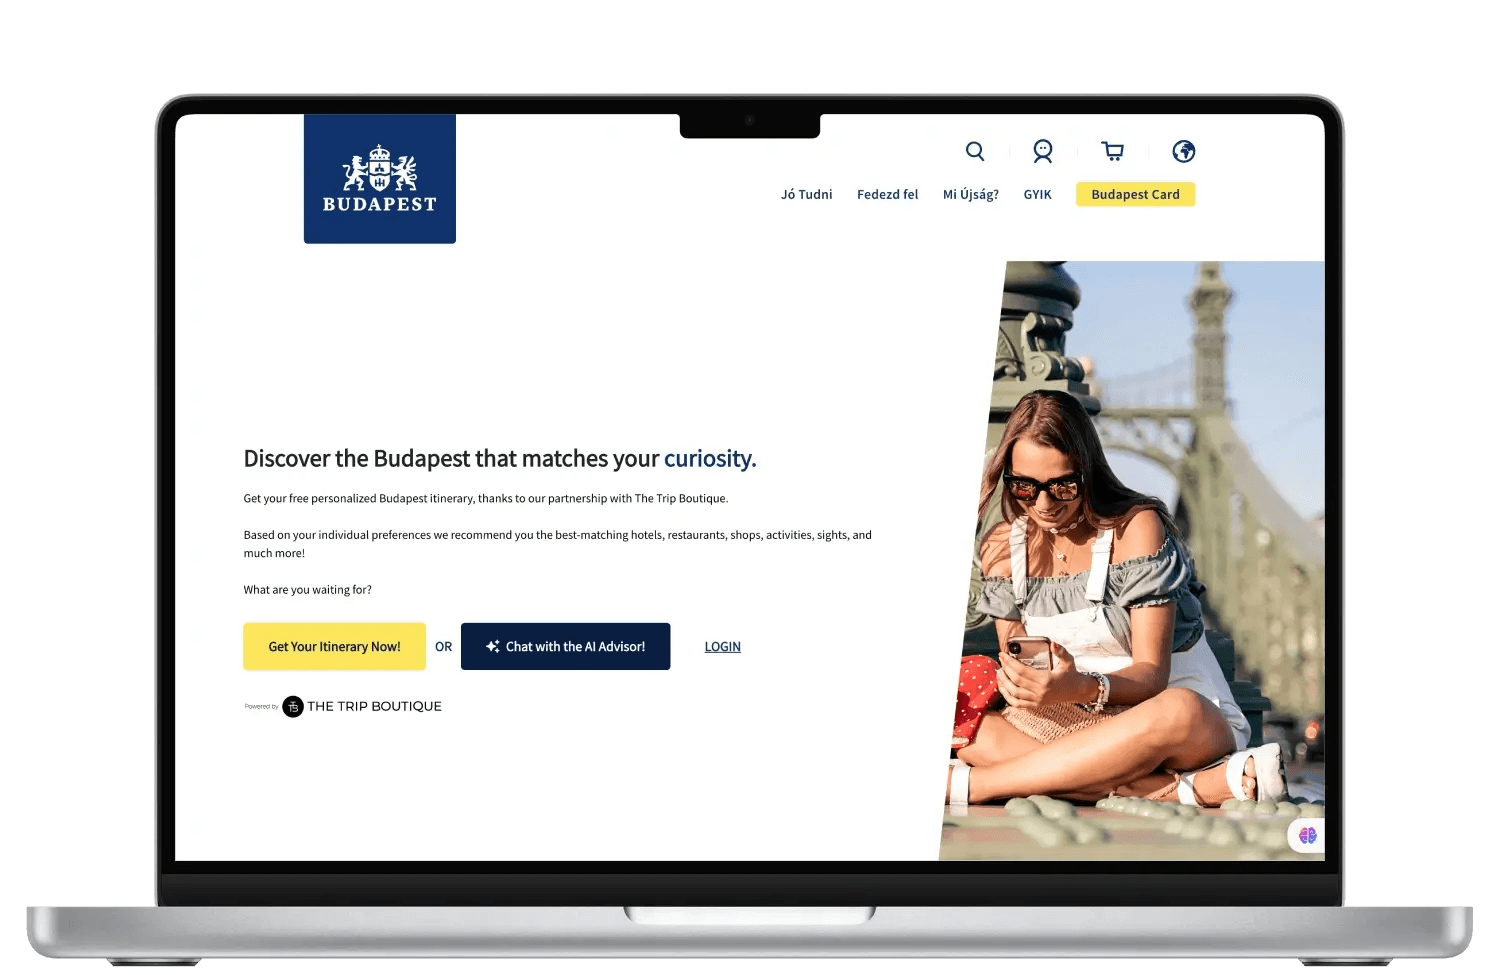 We enable Budapest Brand to offer hyper-personalized itineraries to each visitor by embedding our solution into its website